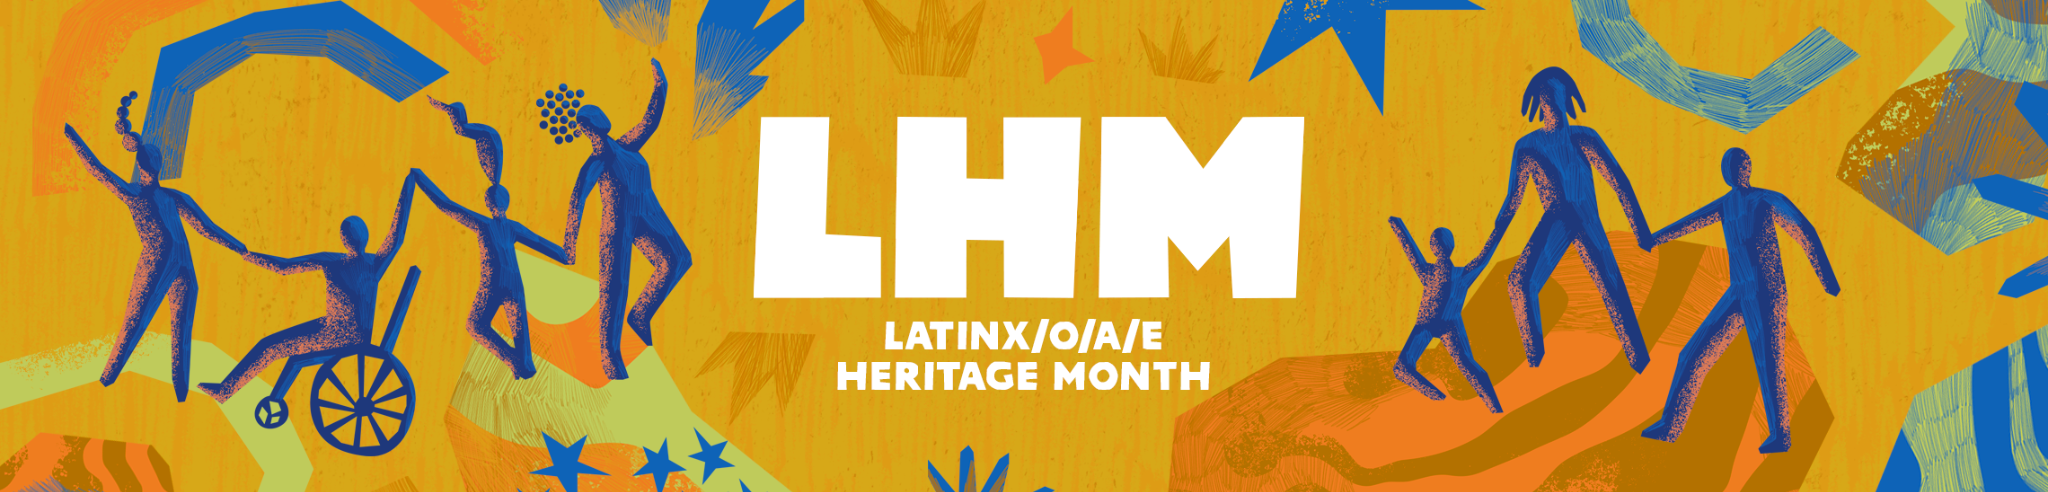 the LHM banner which says &quot;Latinx heritage month&quot;